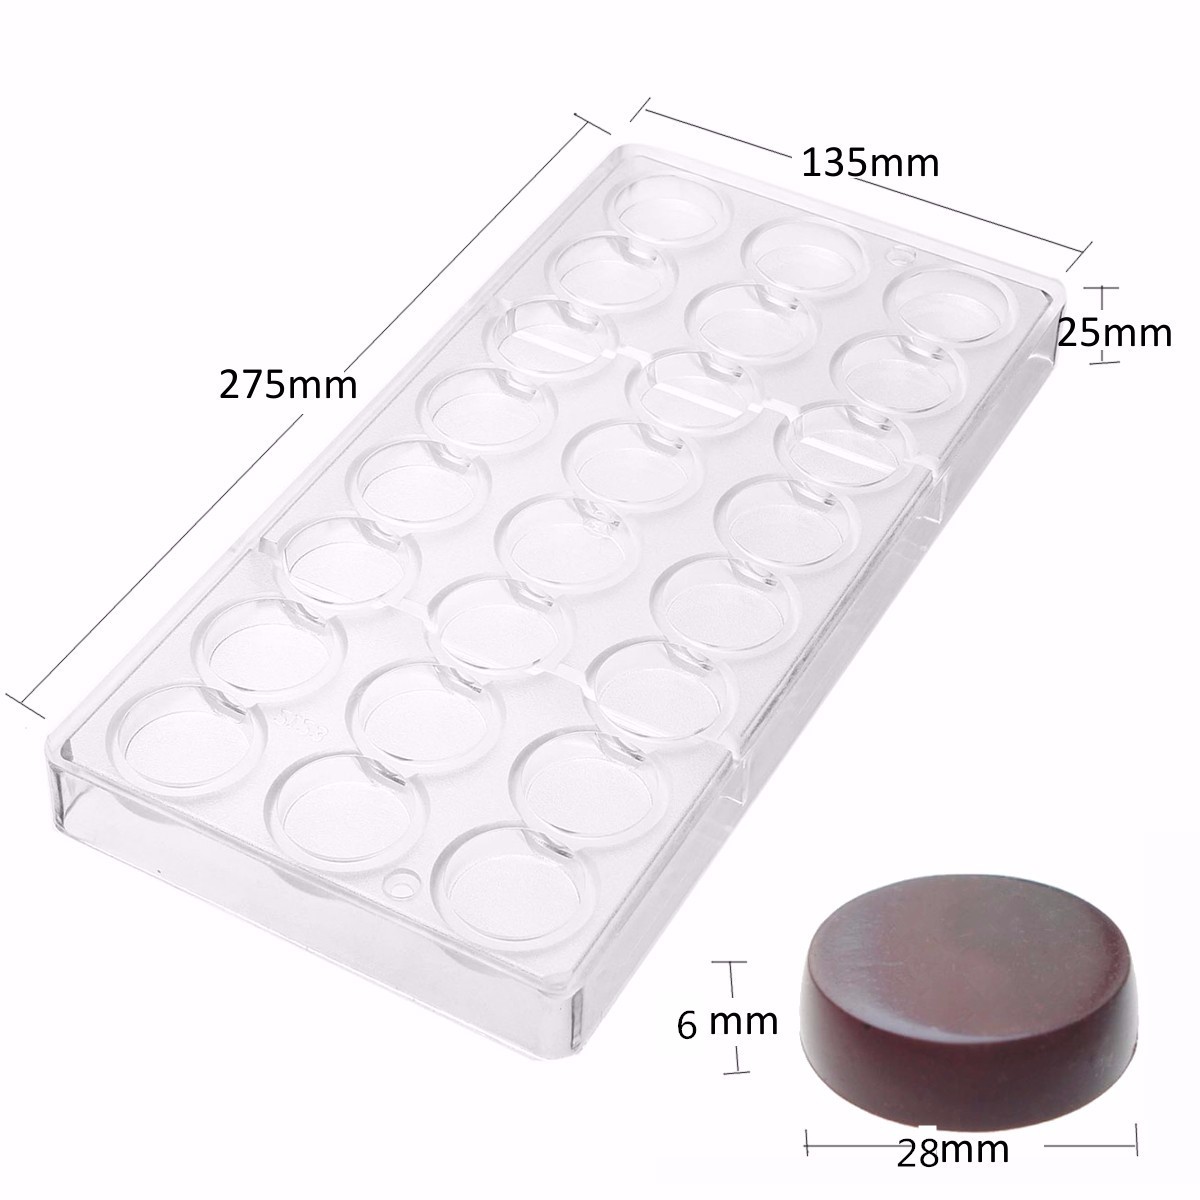 Matte-Round-Shaped-Polycarbonate-Sweet-Candy-Mold-24-Cavity-DIY-PC-Chocolate-Mould-Tray-1336437